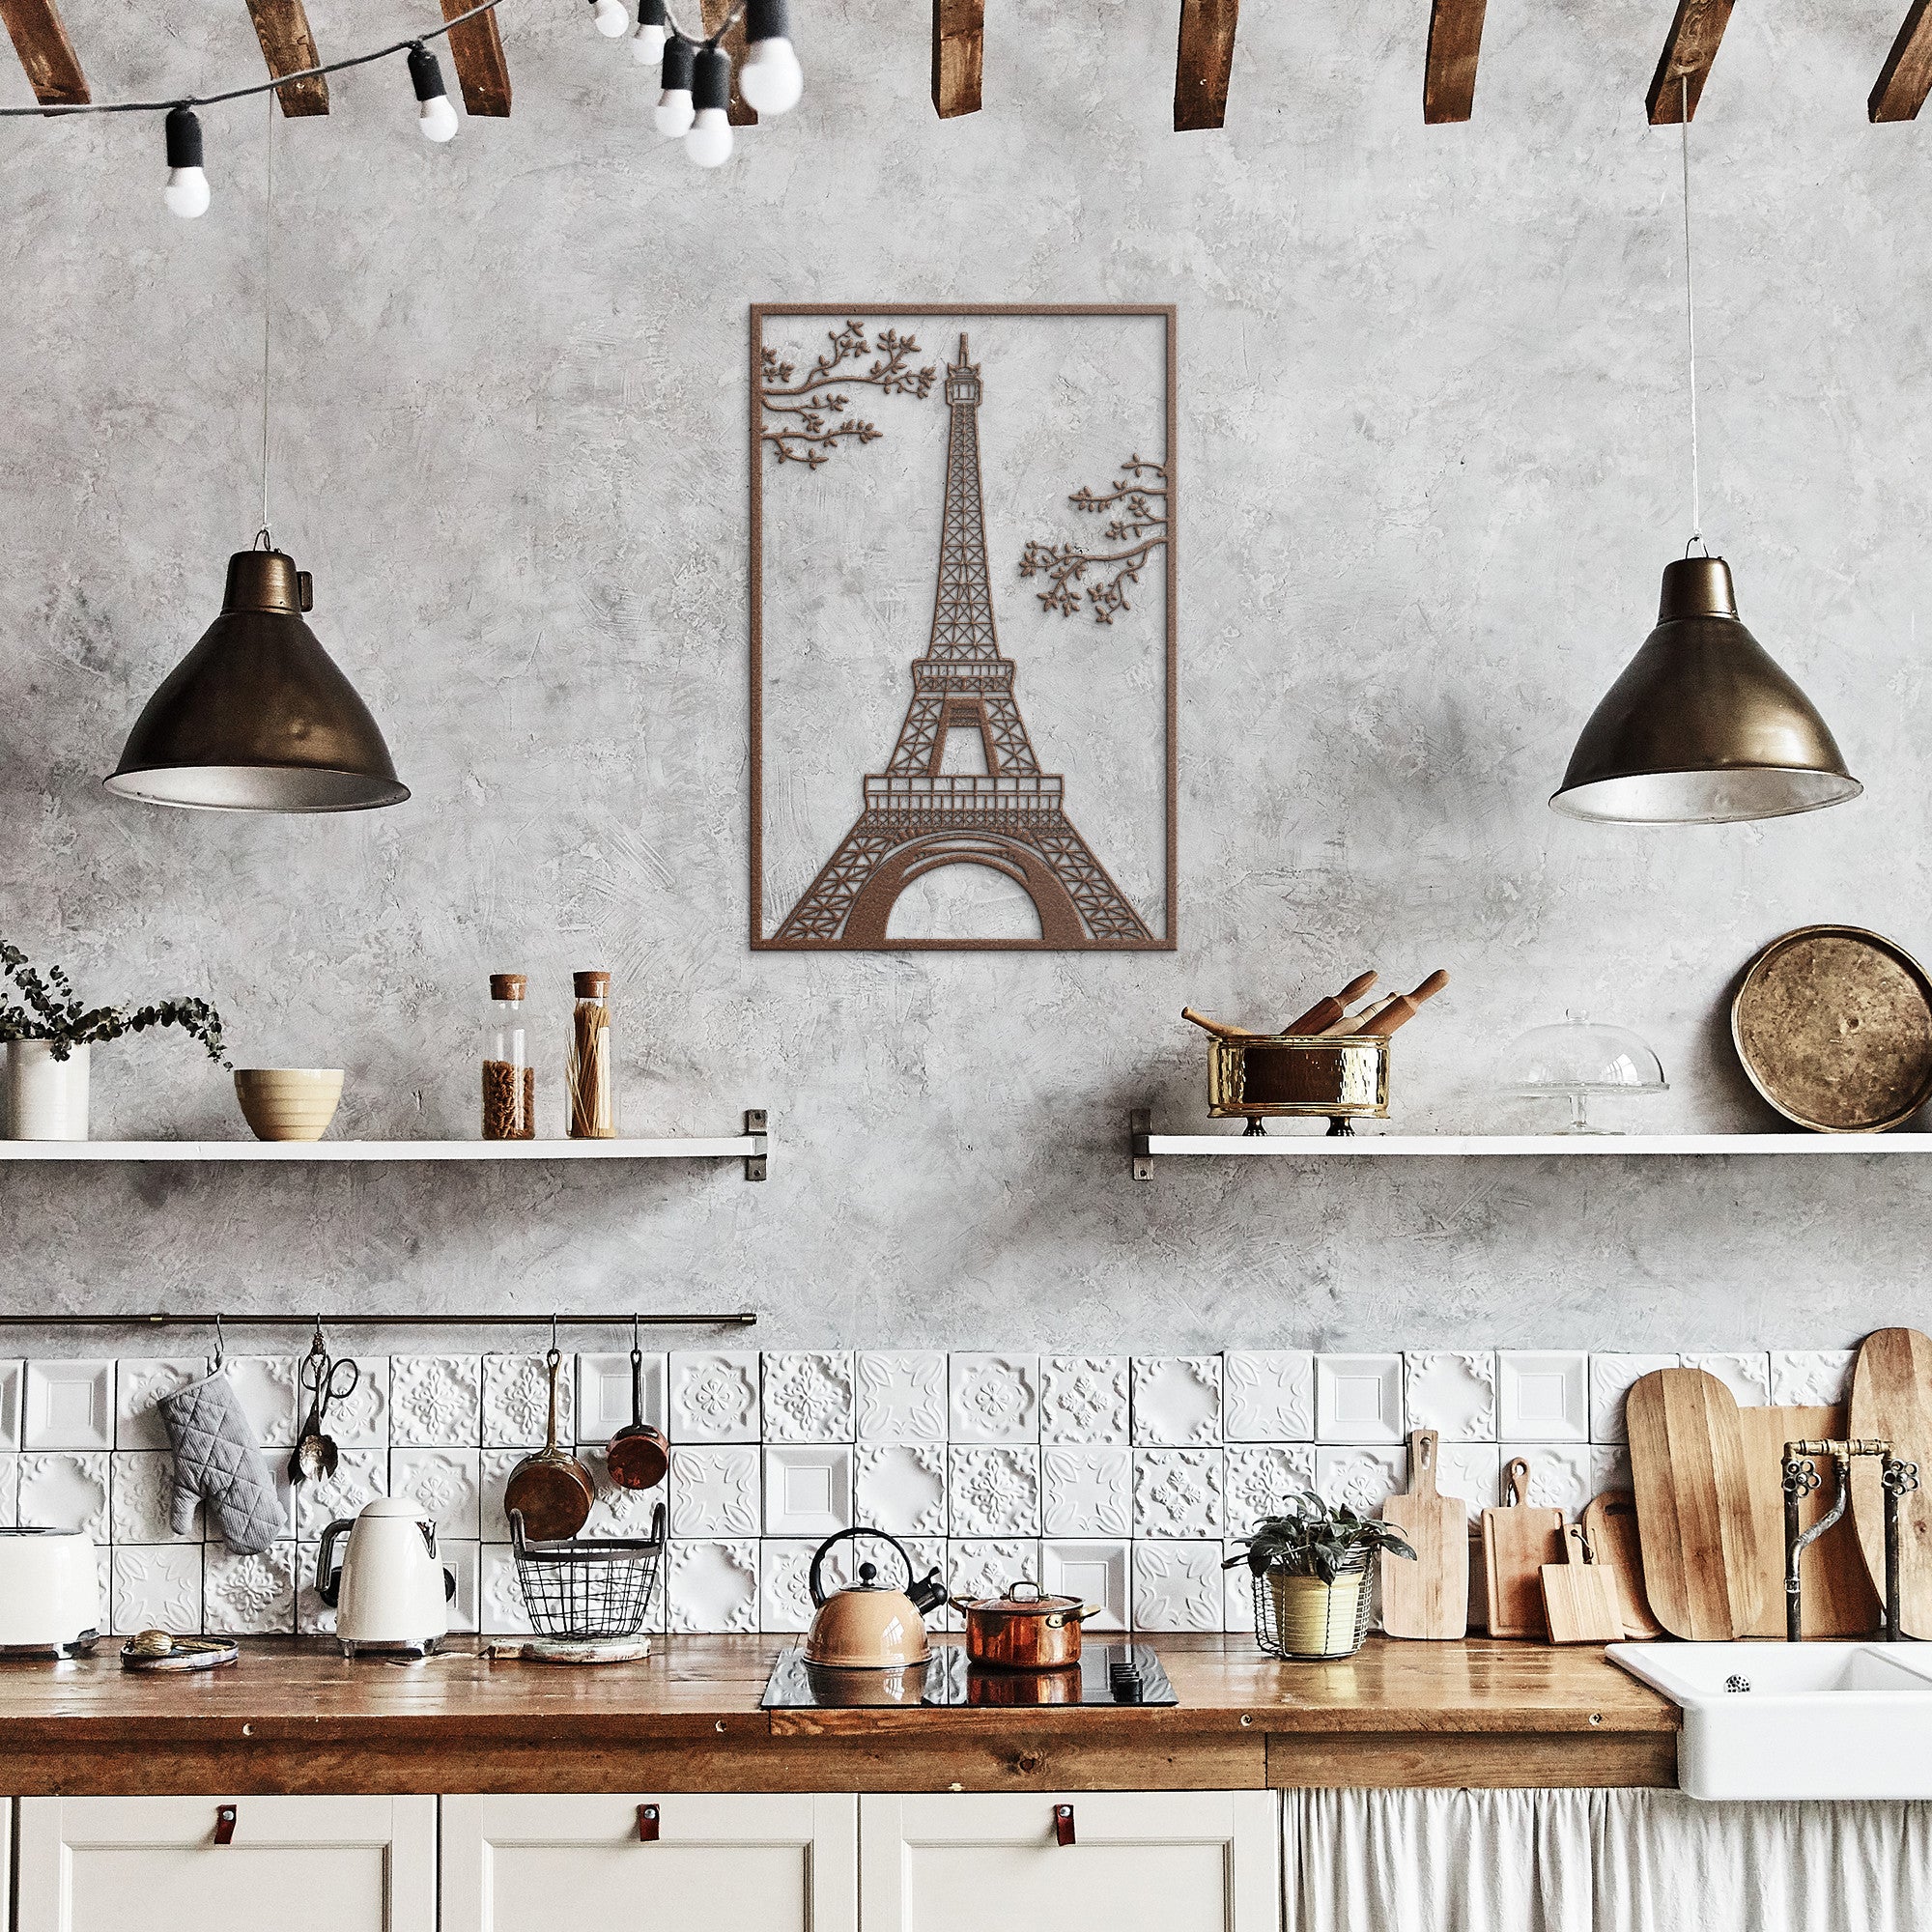 Eiffel Tower Paris France Wall Hang Art Decor Plate Country Kitchen Decor  Wall Plate Ceramic Decorative Plates for Hanging Housewarming Gift Home